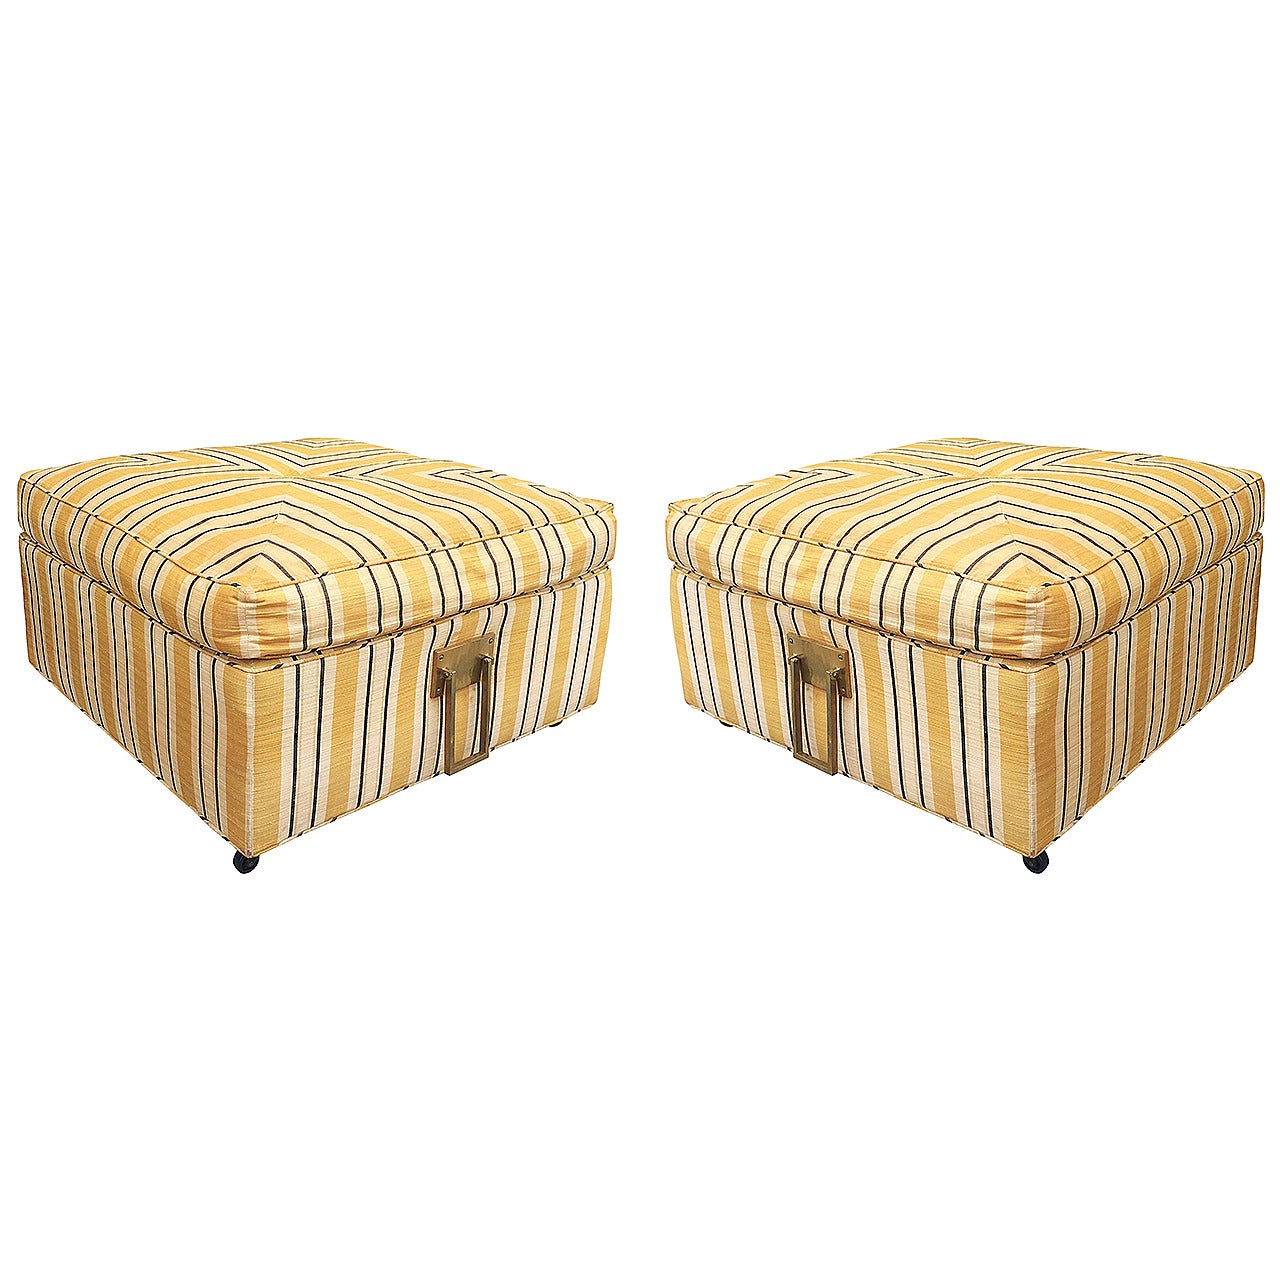 Pair of 1960s Square Ottomans in Casters and Solid Brass Handles